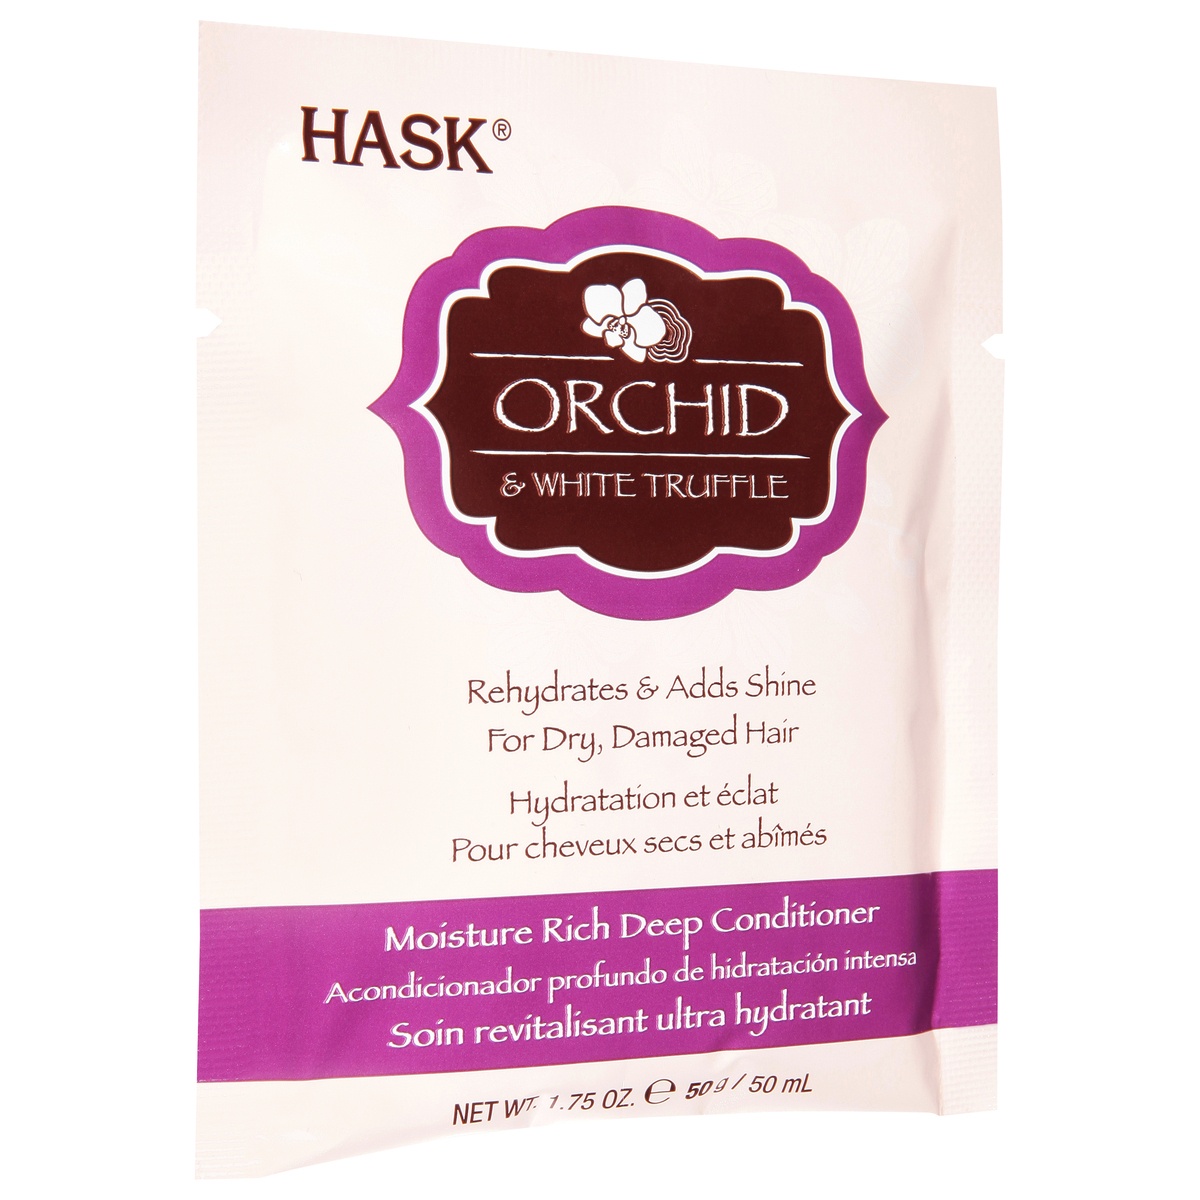 slide 10 of 10, Hask Orchid White Truffle Moisture Rich Deep Conditioner, 1.75 oz